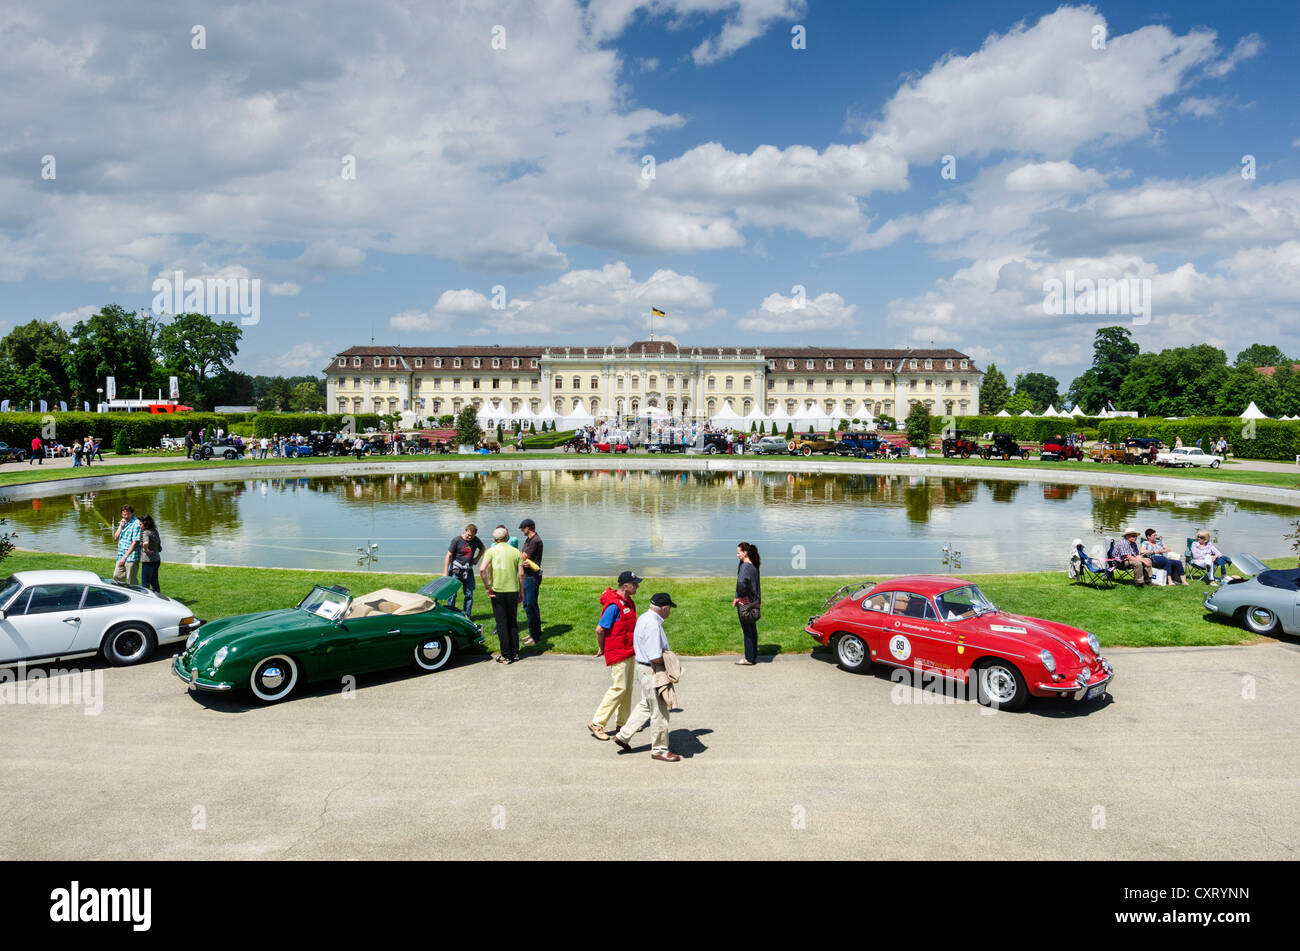 The Castle grounds of Schloss Ludwigsburg Palace during the 9th festival of classic cars 'Retro Classics meets Barock' Stock Photo